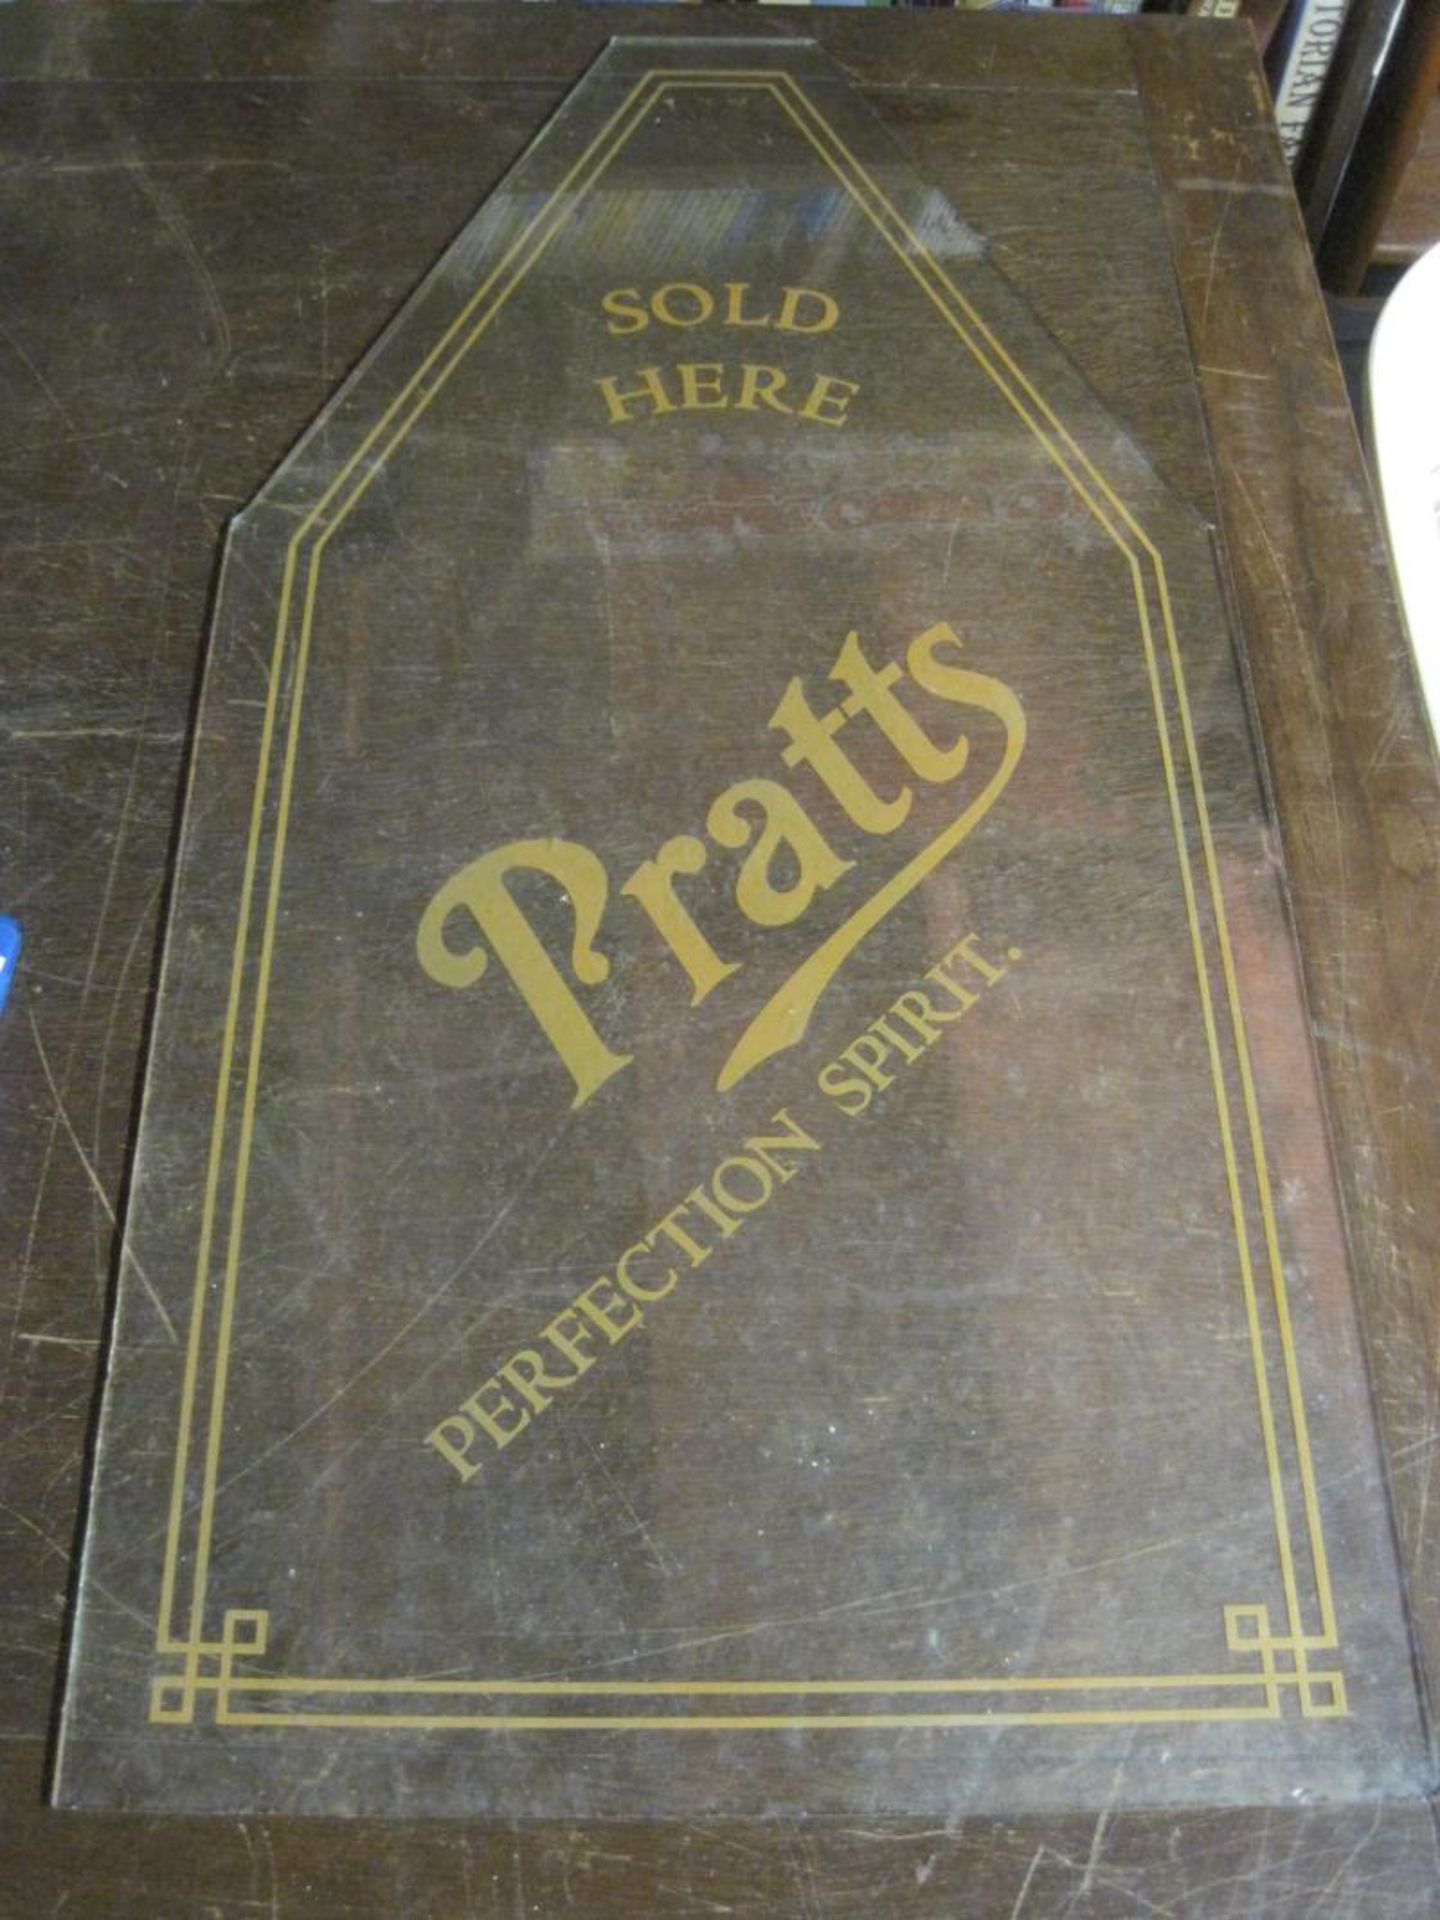 Pratt's Perfection Spirit Sold Here, an etched glass panel 16 x 30 inches